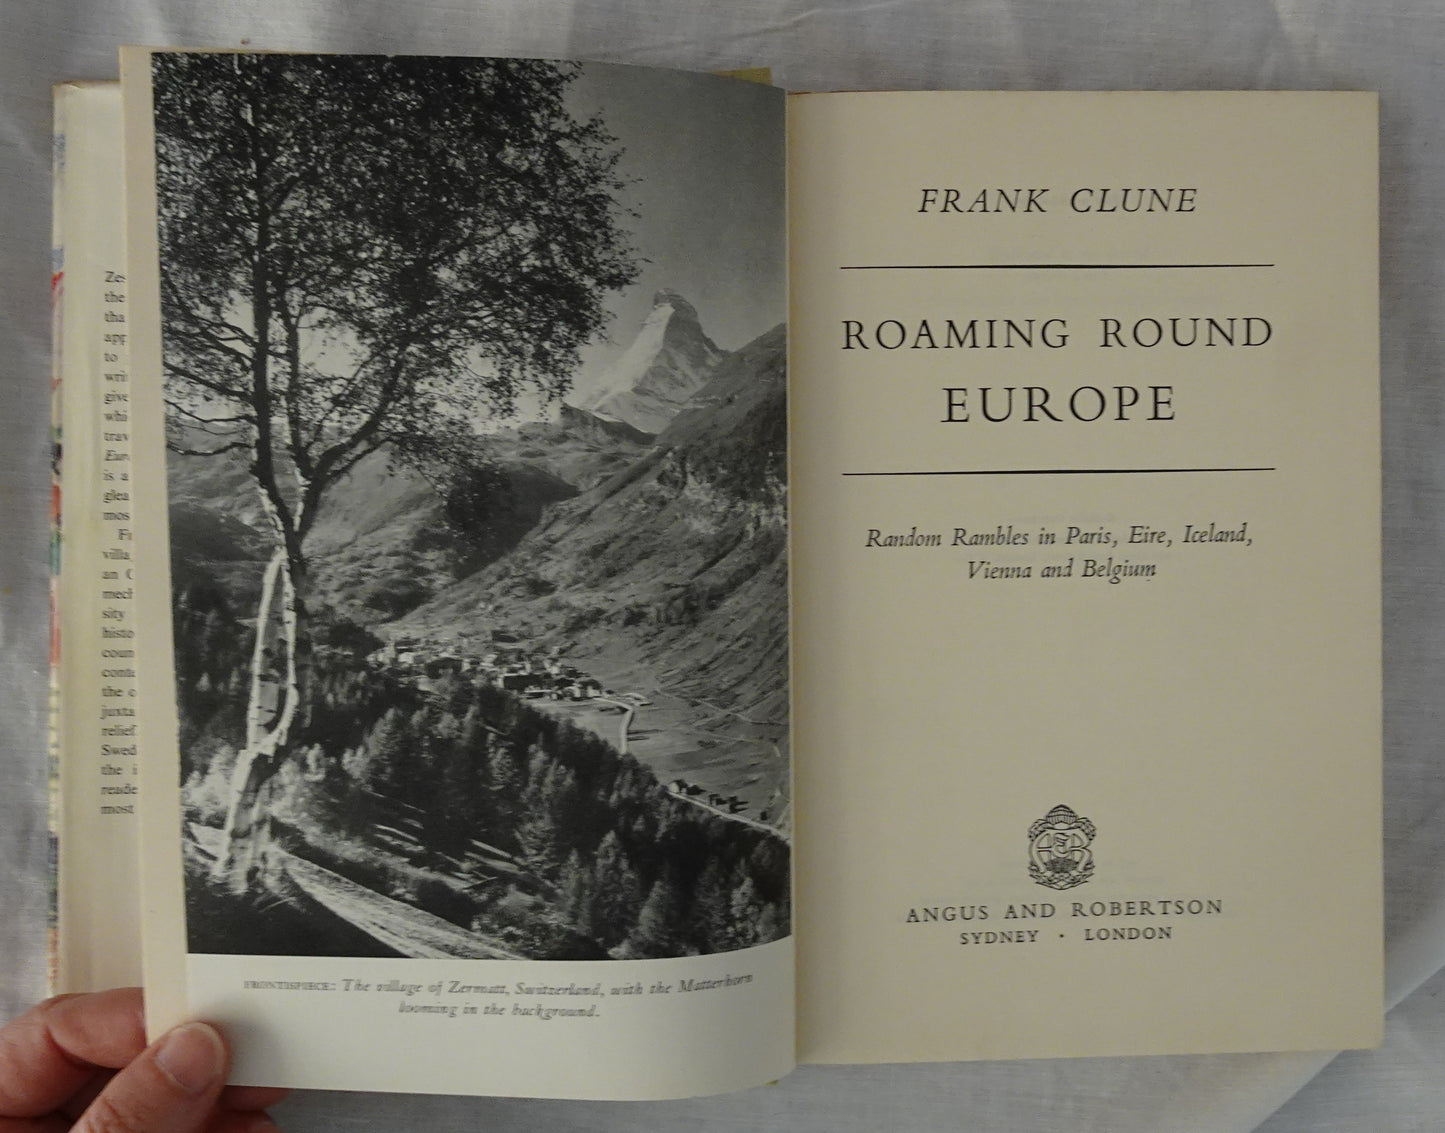 Roaming Round Europe by Frank Clune